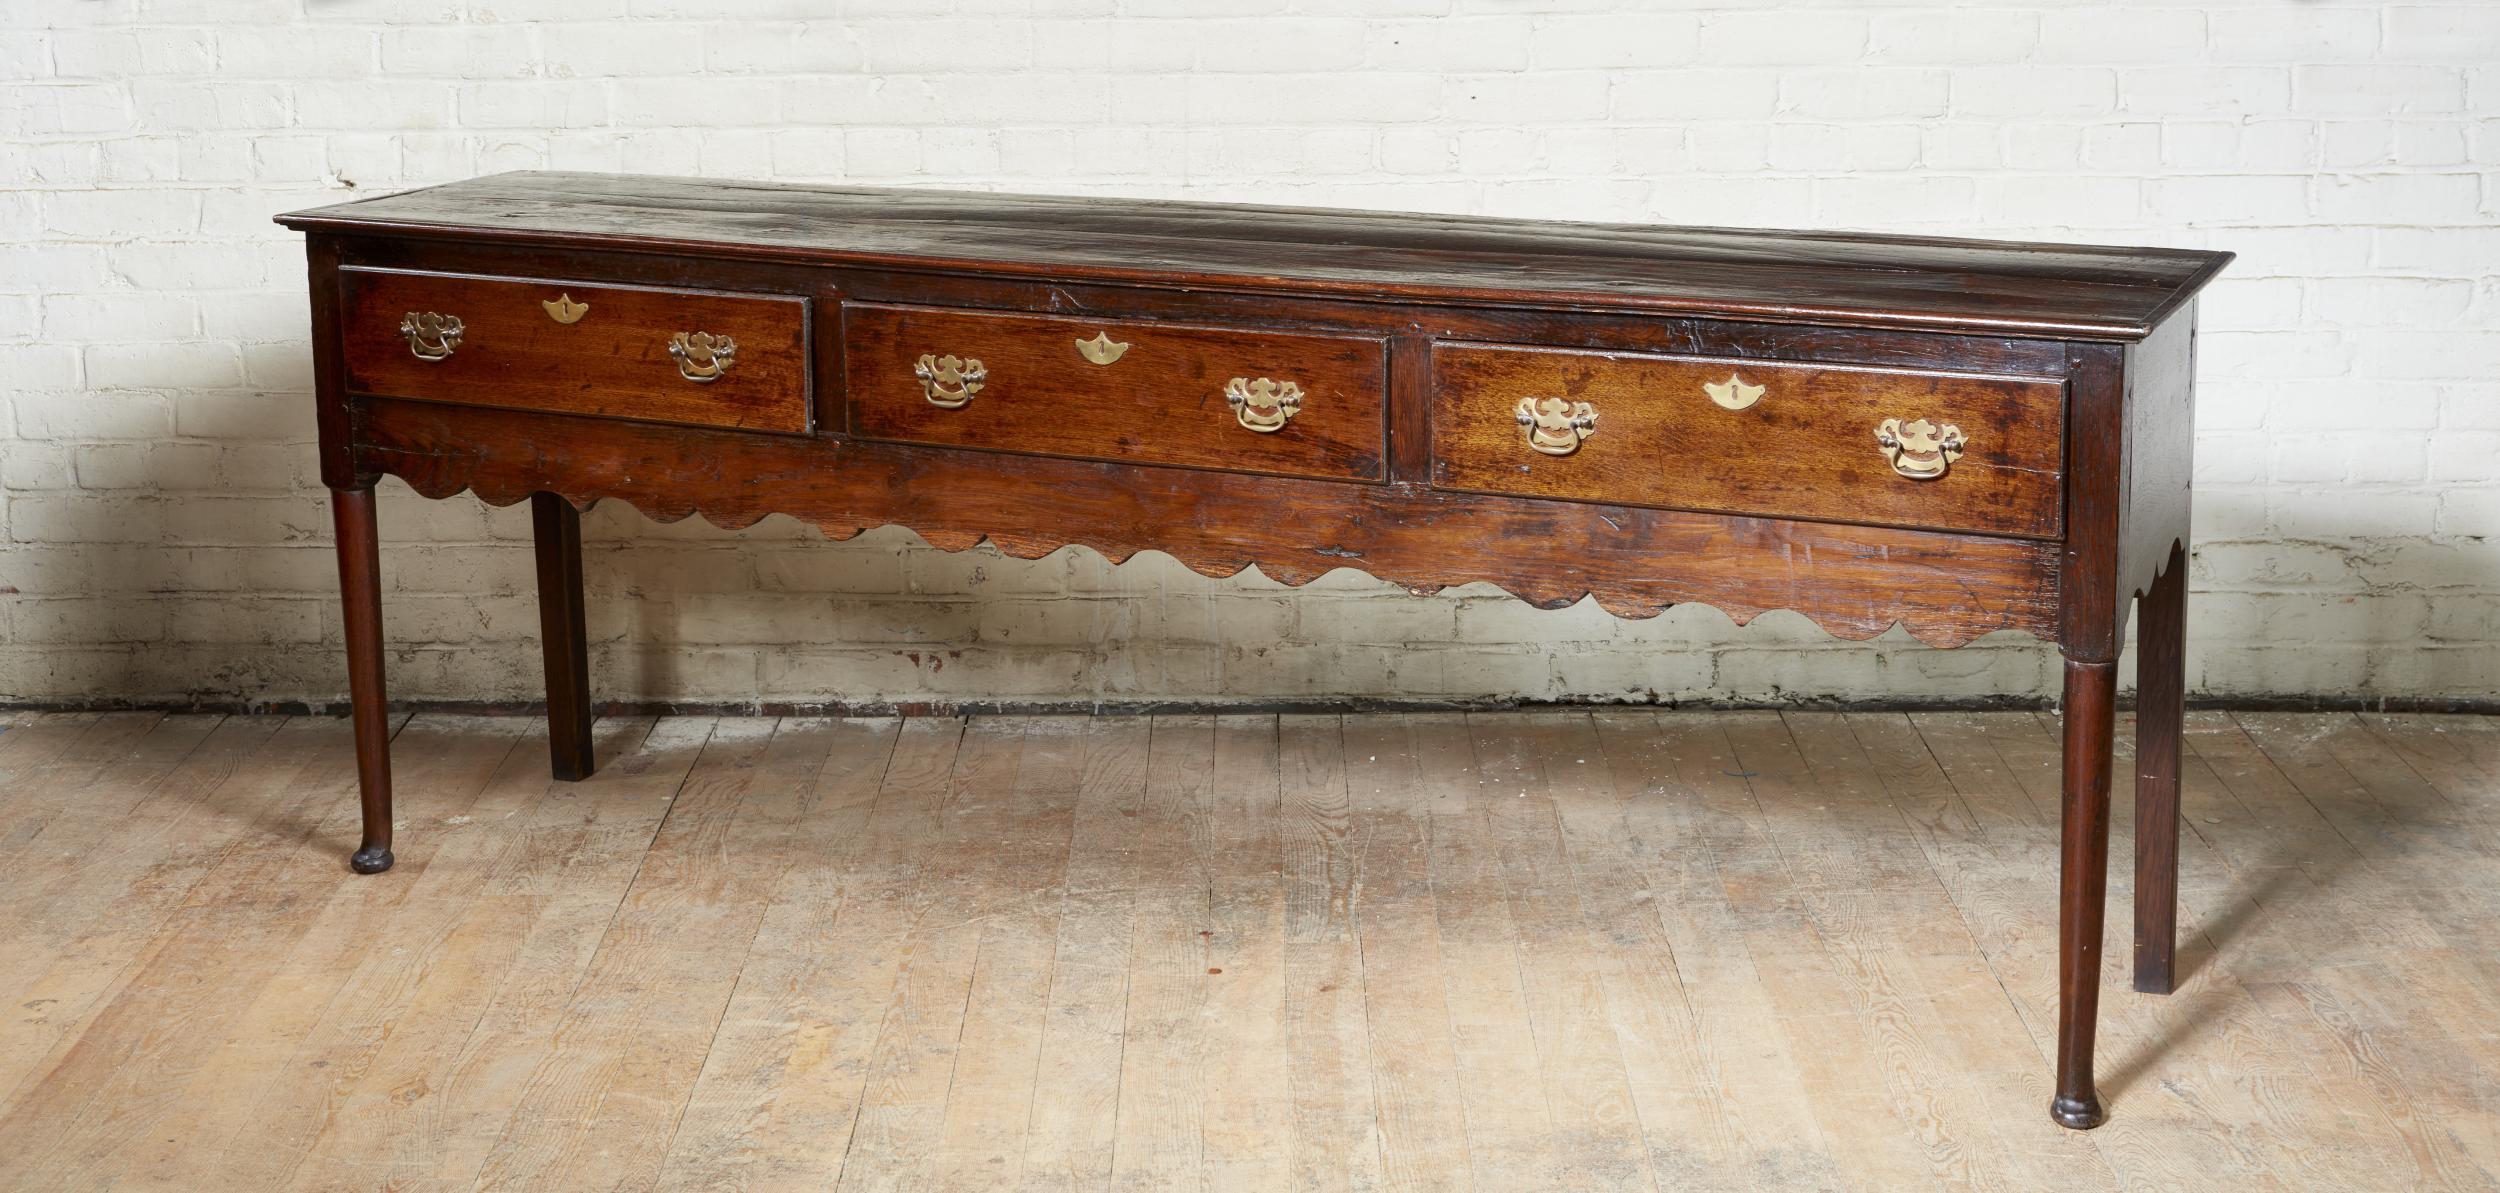 Good English oak pad foot low dresser, the molded top over three drawers over scalloped apron and standing on turned legs ending in pad feet, the whole with good rich color and patination.